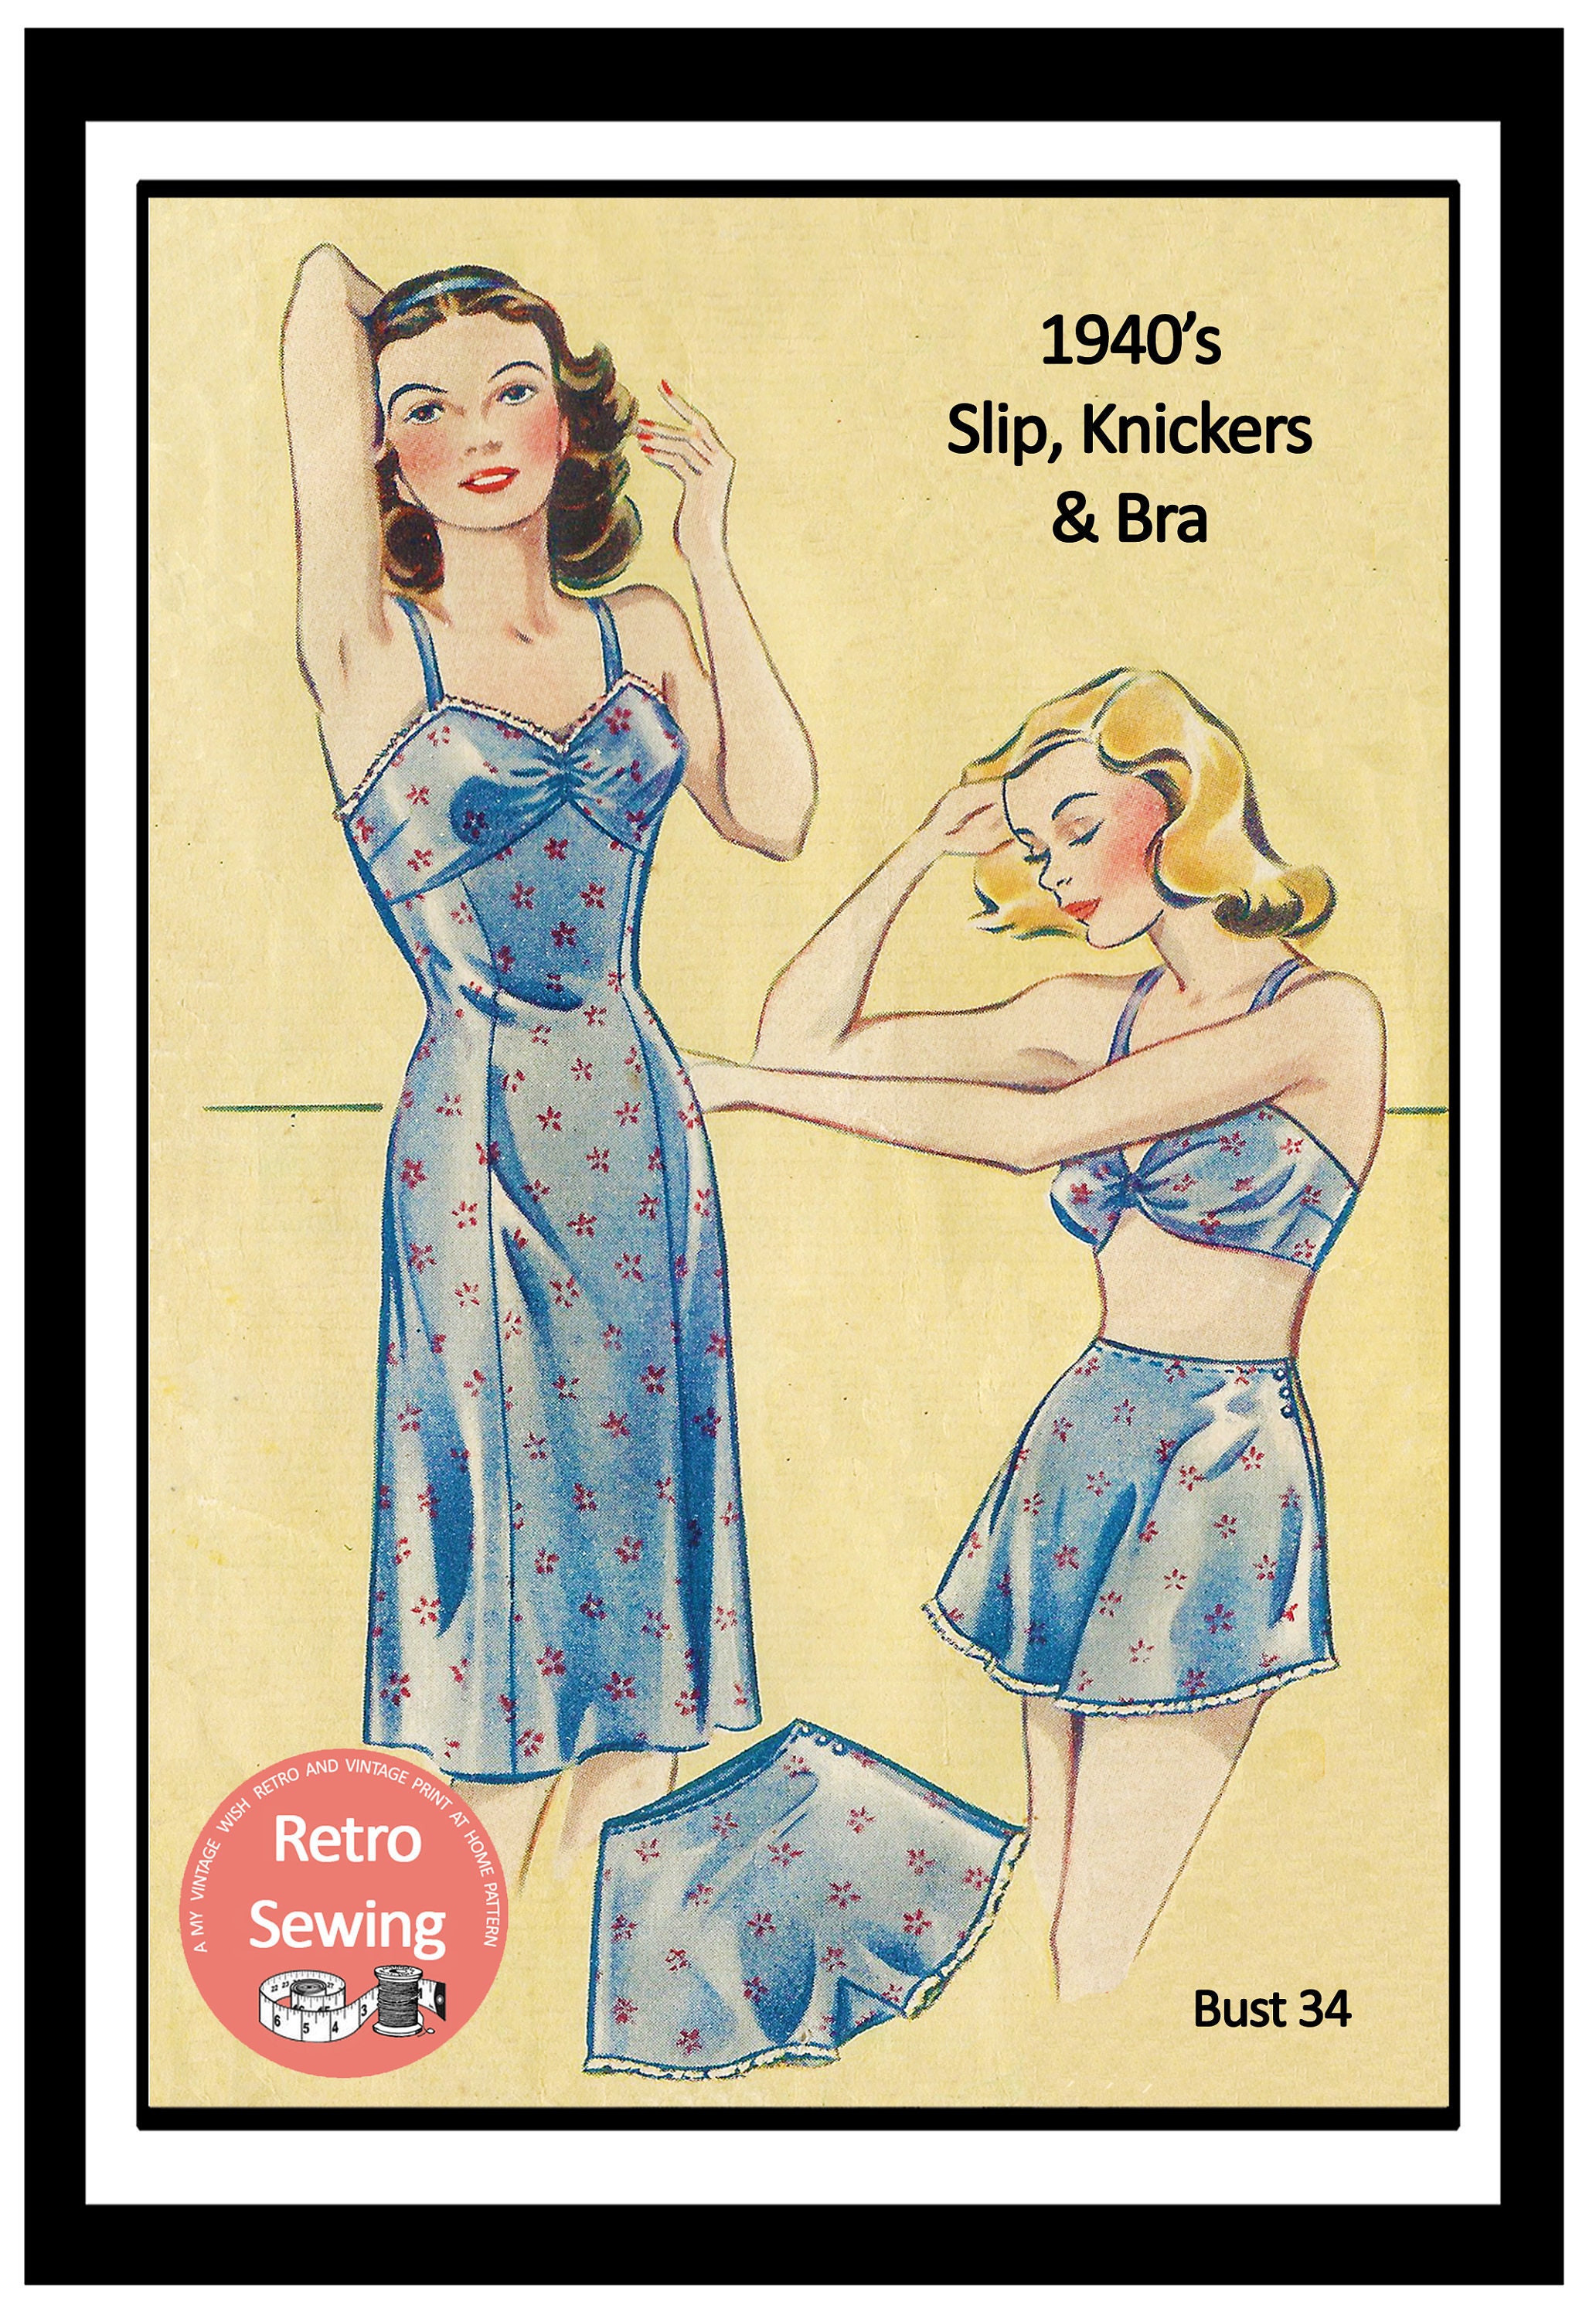 1940's Bra, Knickers and Cami-knickers PDF Lingerie Knitting Pattern